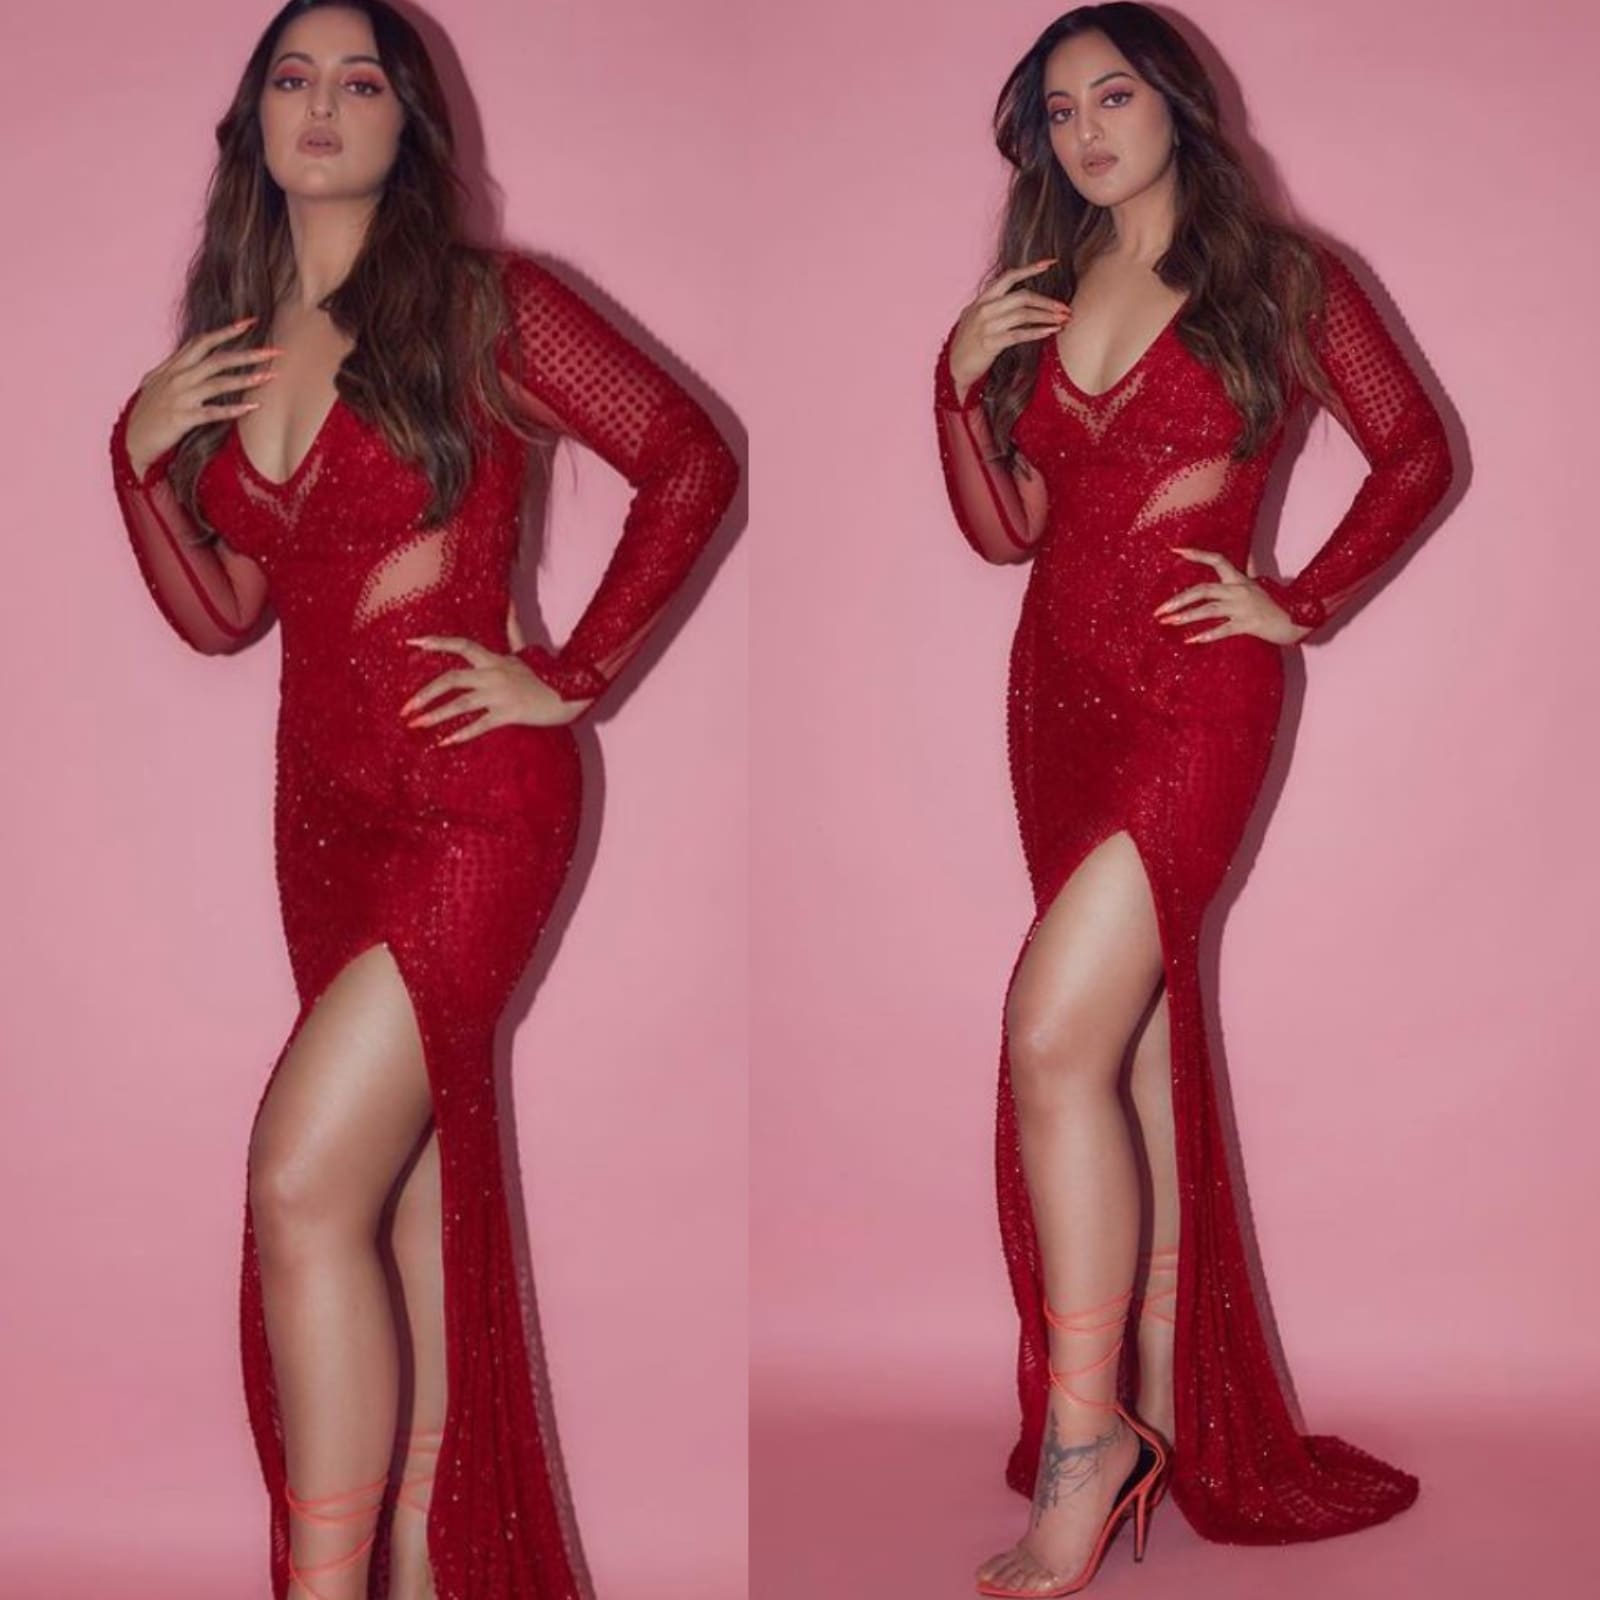 Sonakshi Sinha Fuked - Sonakshi Sinha Raises The Glam Quotient In A Red Thigh-High Slit Dress -  News18